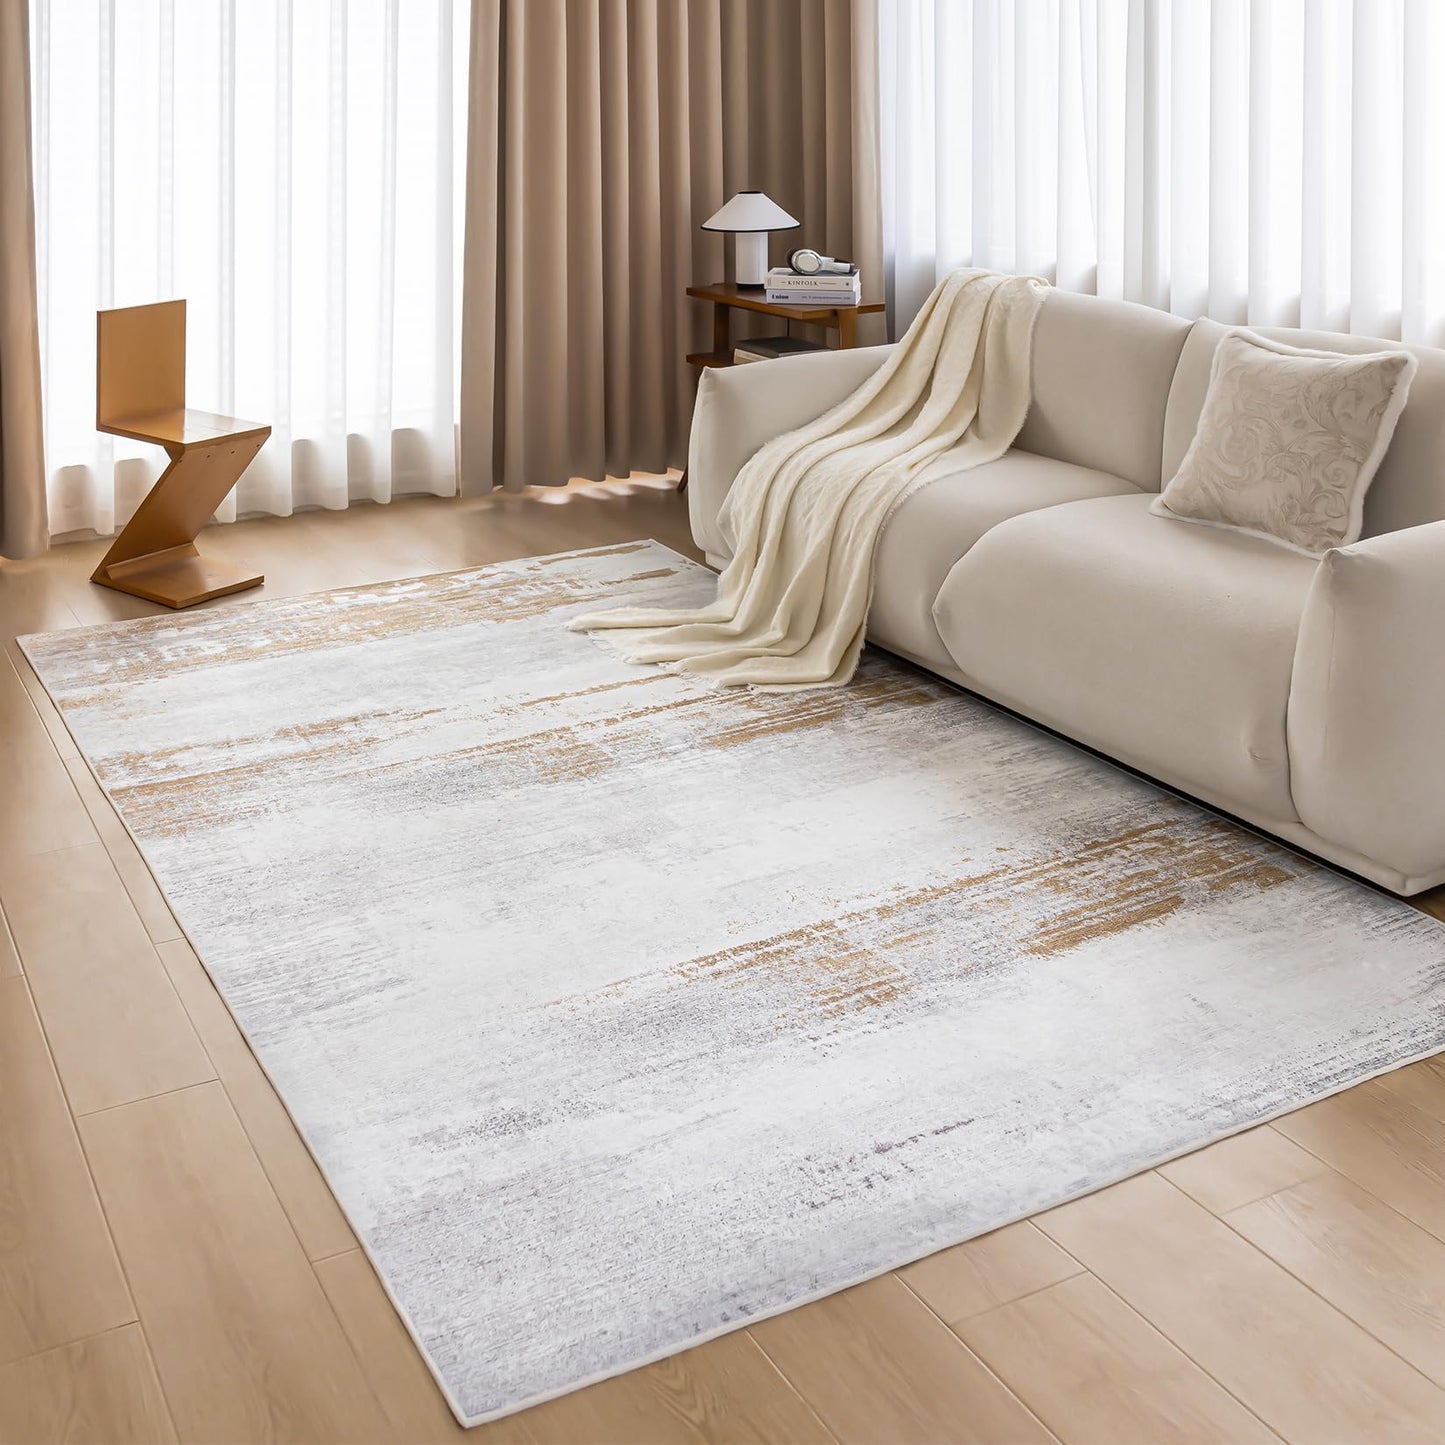 OMERAI Machine Washable Rug 5x7 Modern Abstract Area Rugs with Low-Pile Non-Shedding Foldable Area Rugs for Living Room, Stain Resistant Area Rugs for Bedroom Dining Room Rug Washable Beige Gray